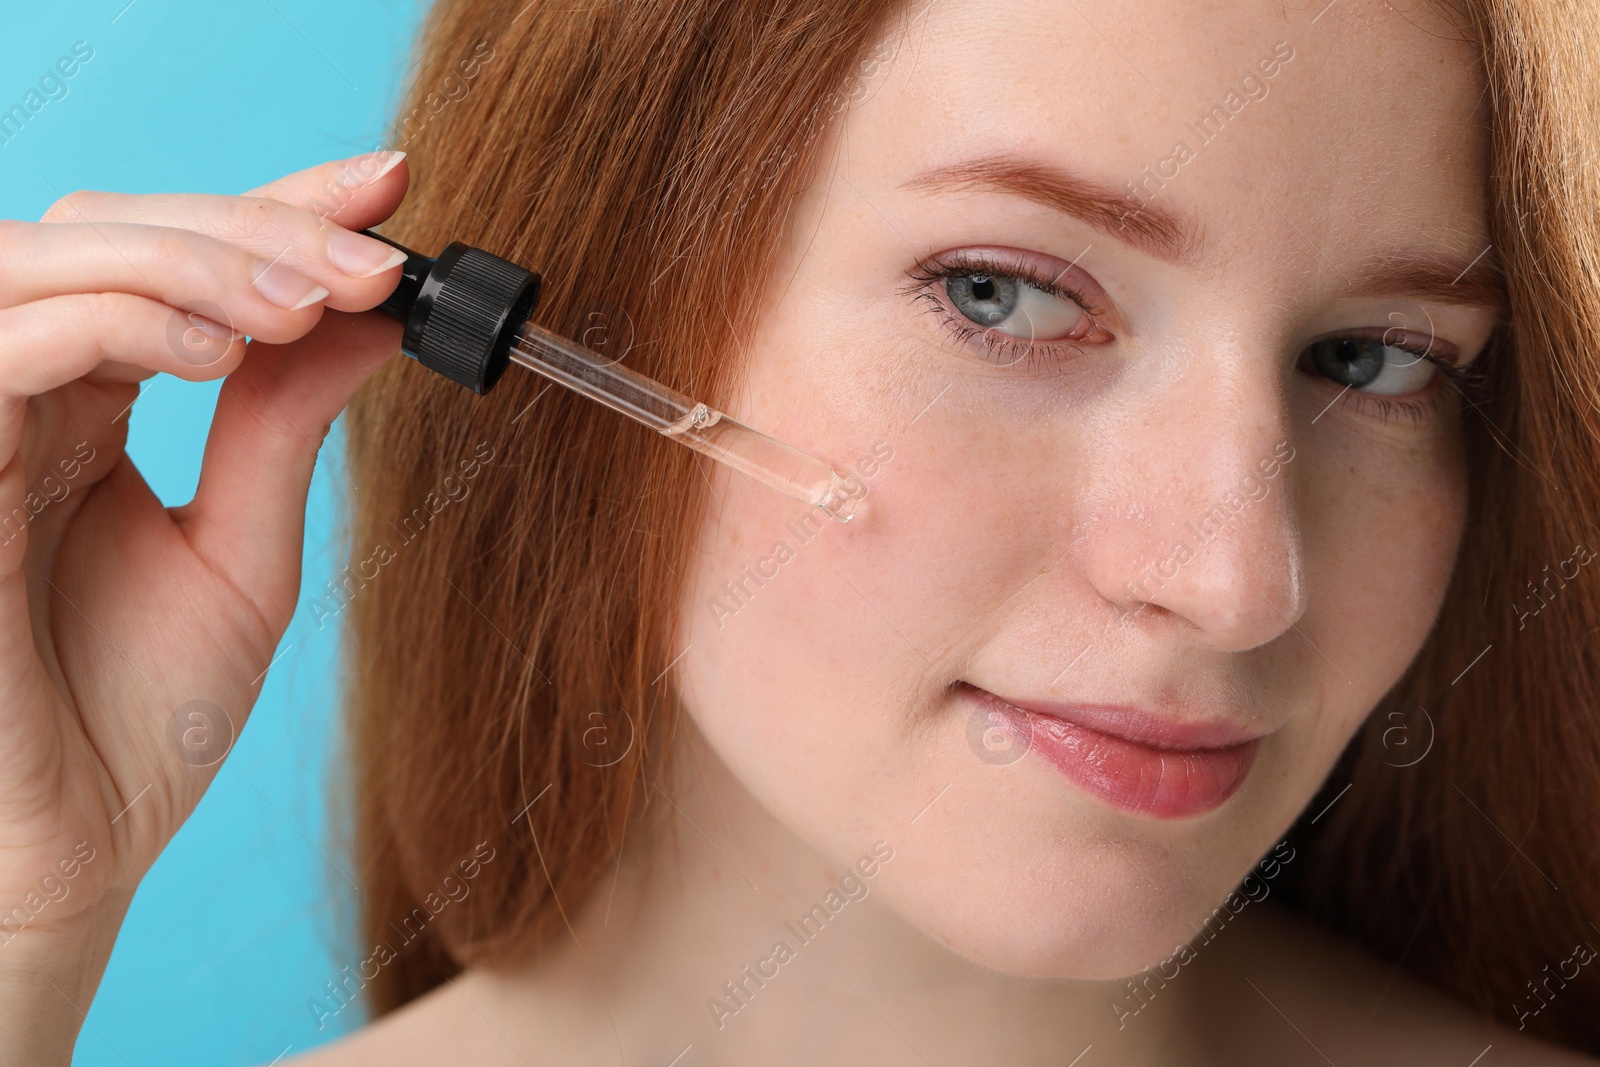 Photo of Beautiful woman with freckles applying cosmetic serum onto her face against light blue background, closeup